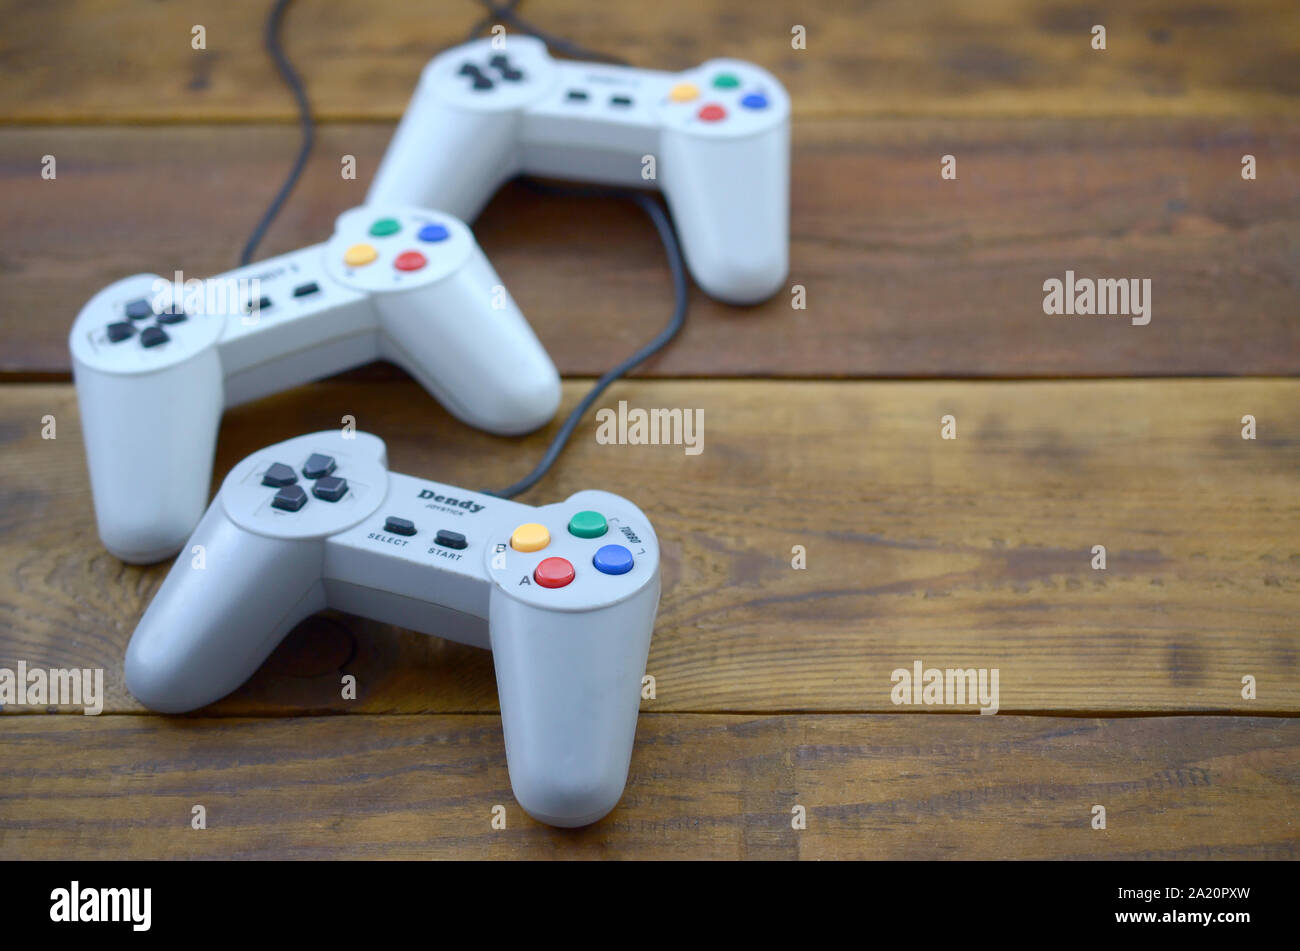 KHARKOV, UKRAINE - SEPTEMBER 18, 2019: Dendy video game console classic controllers on a wooden table. One of the most classic gaming consoles Stock Photo